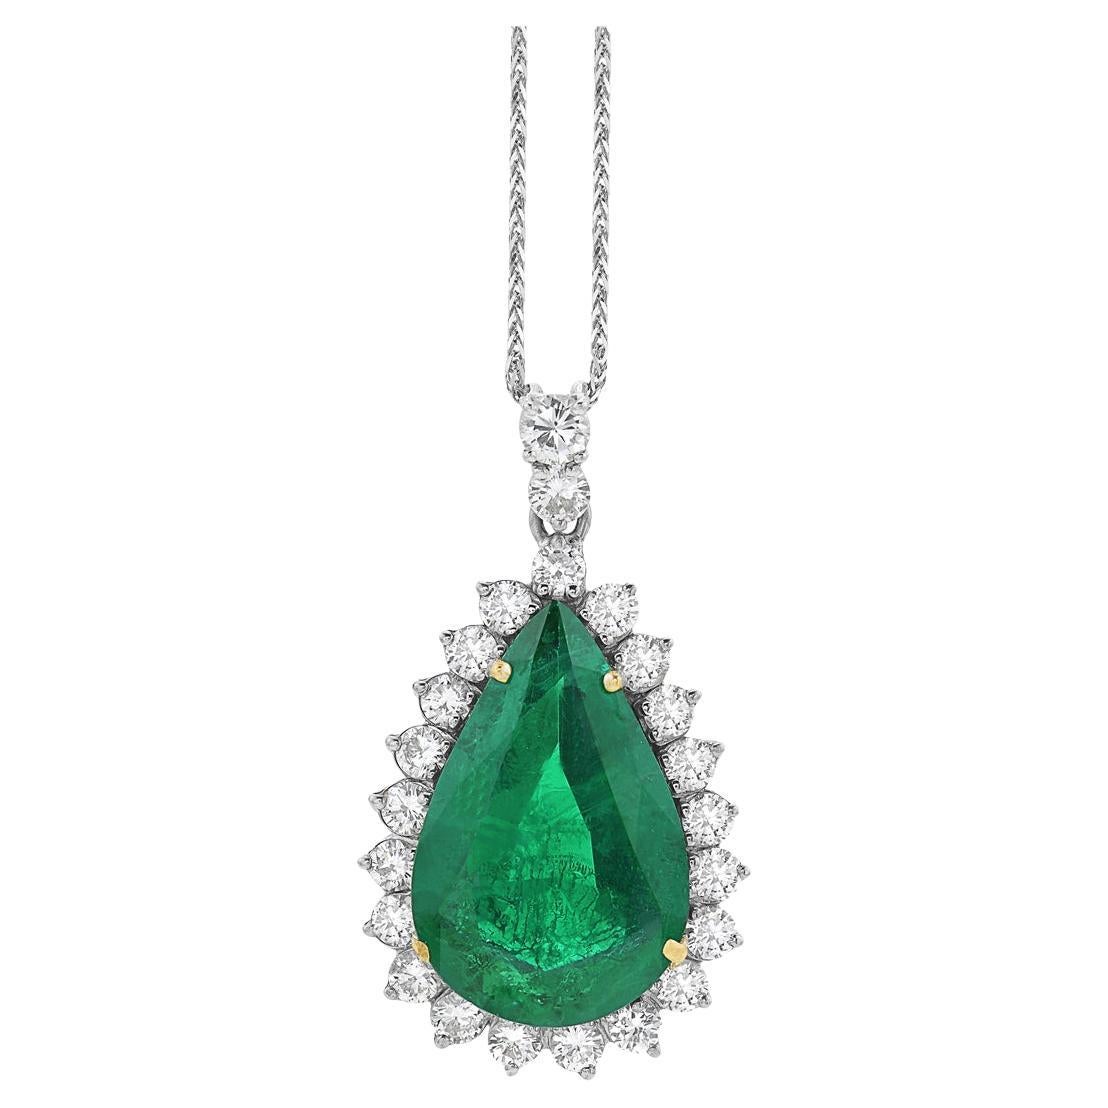 15 Ct Pear Hydro Emerald & 4 Ct Diamond Pendent/Necklace 18 Kt White Gold For Sale